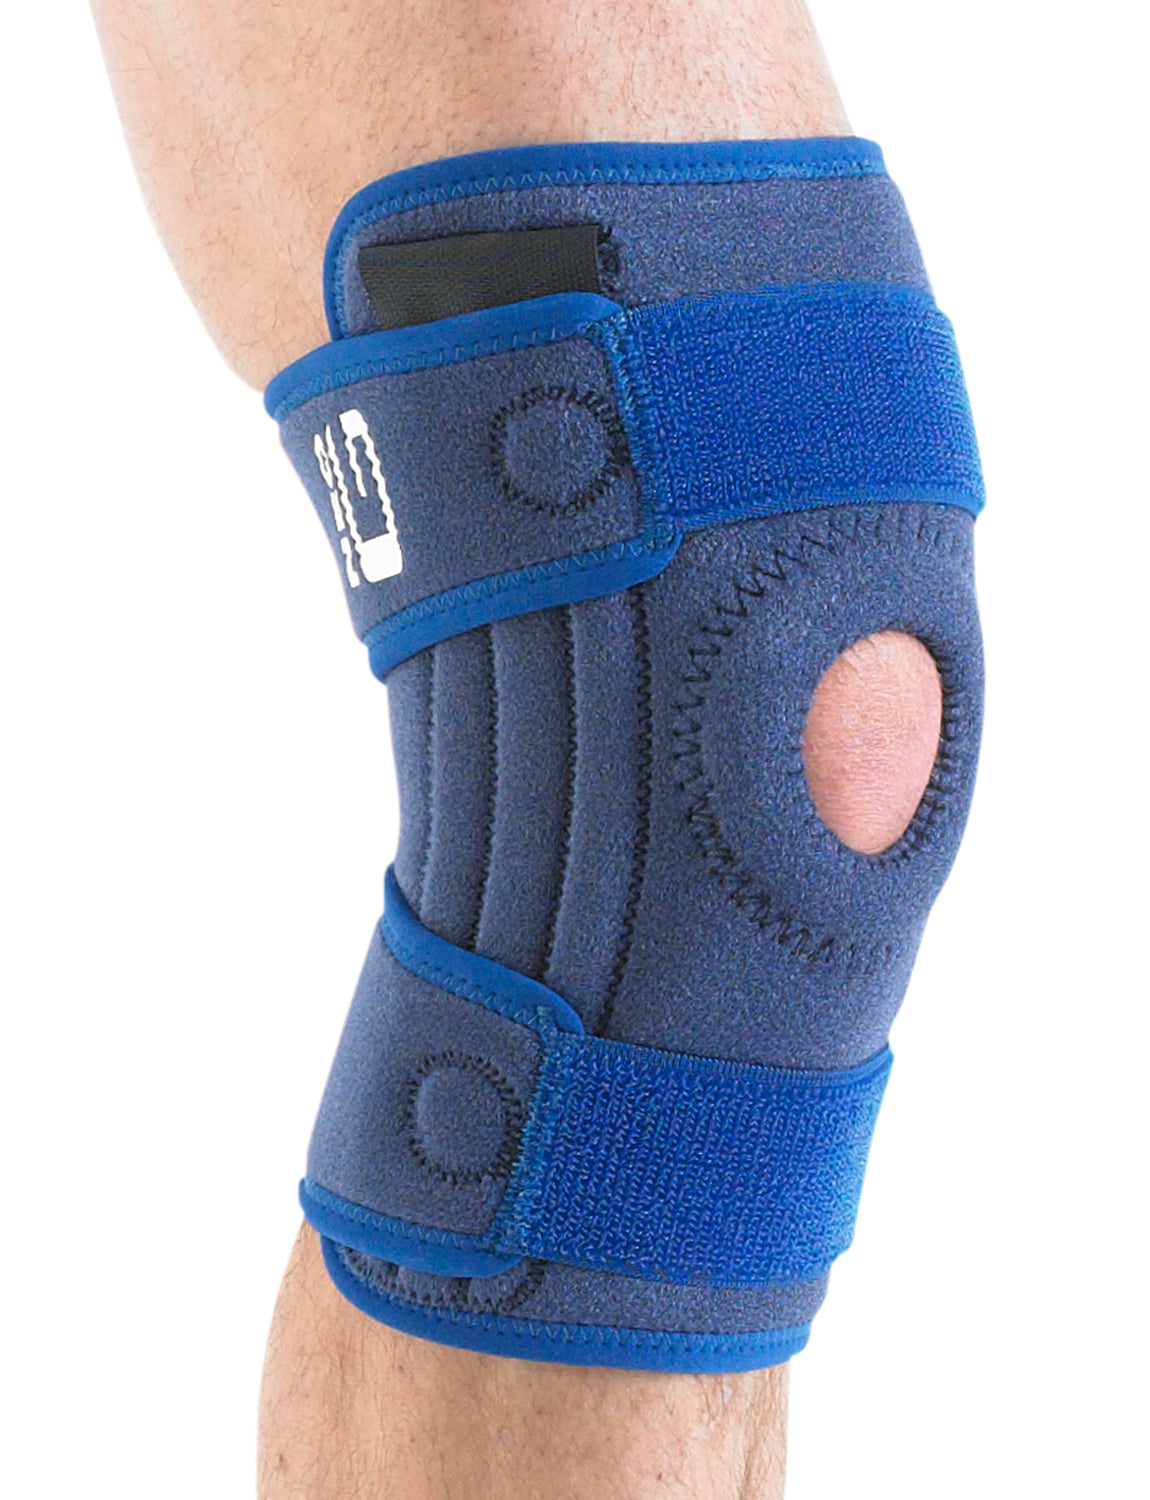 A) Group A: a patella-stabilizing, motion-restricting knee brace. The